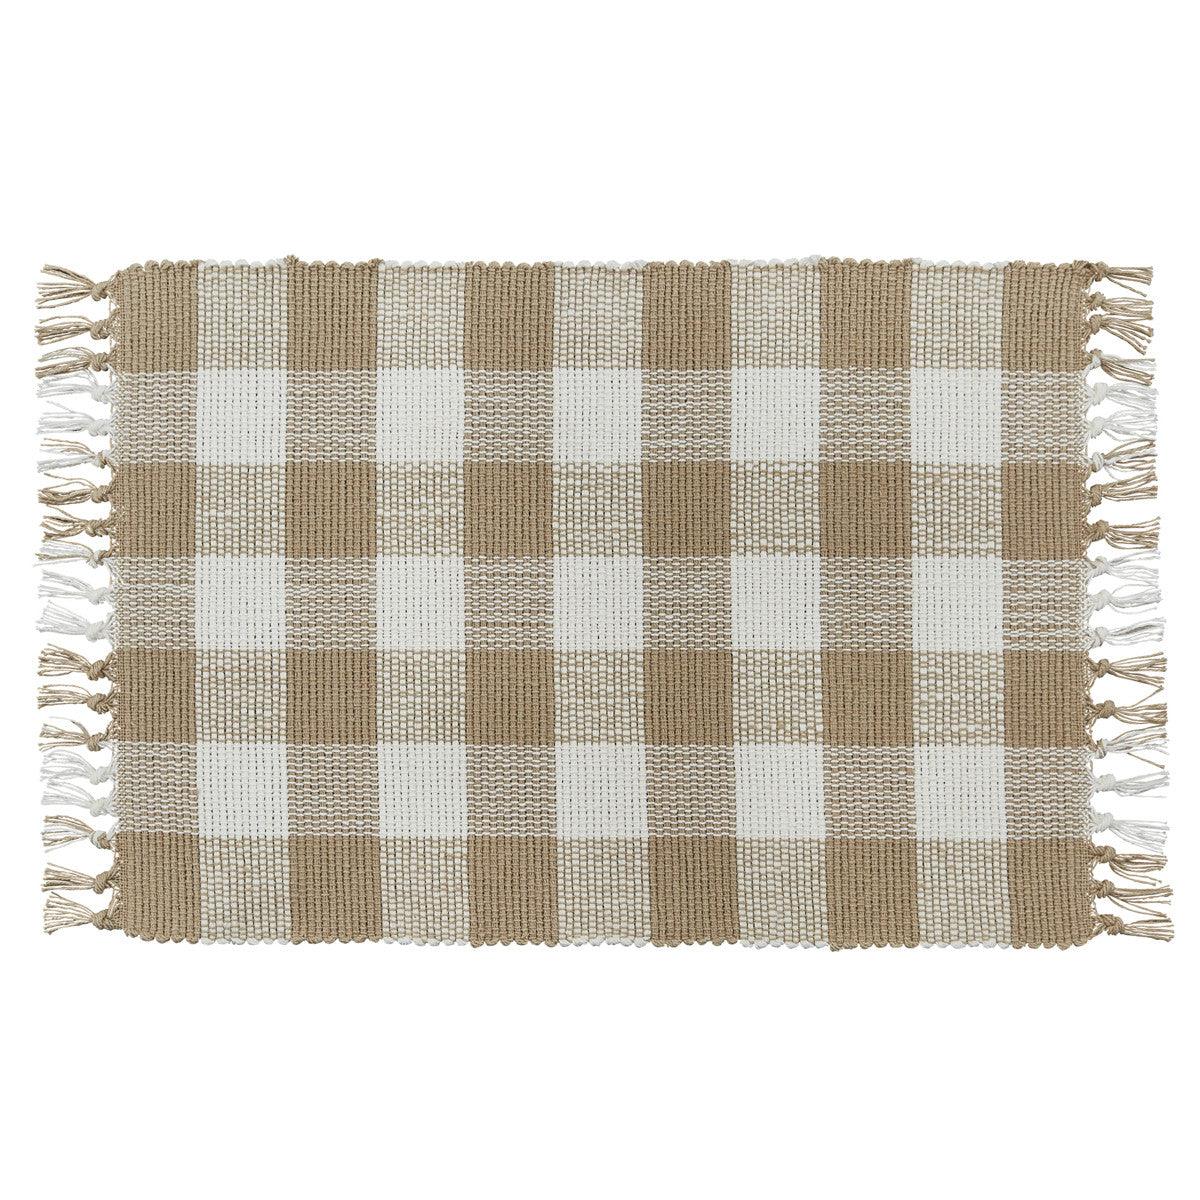 Wicklow Check Placemats - Natural Set Of 6 Park Designs - The Fox Decor